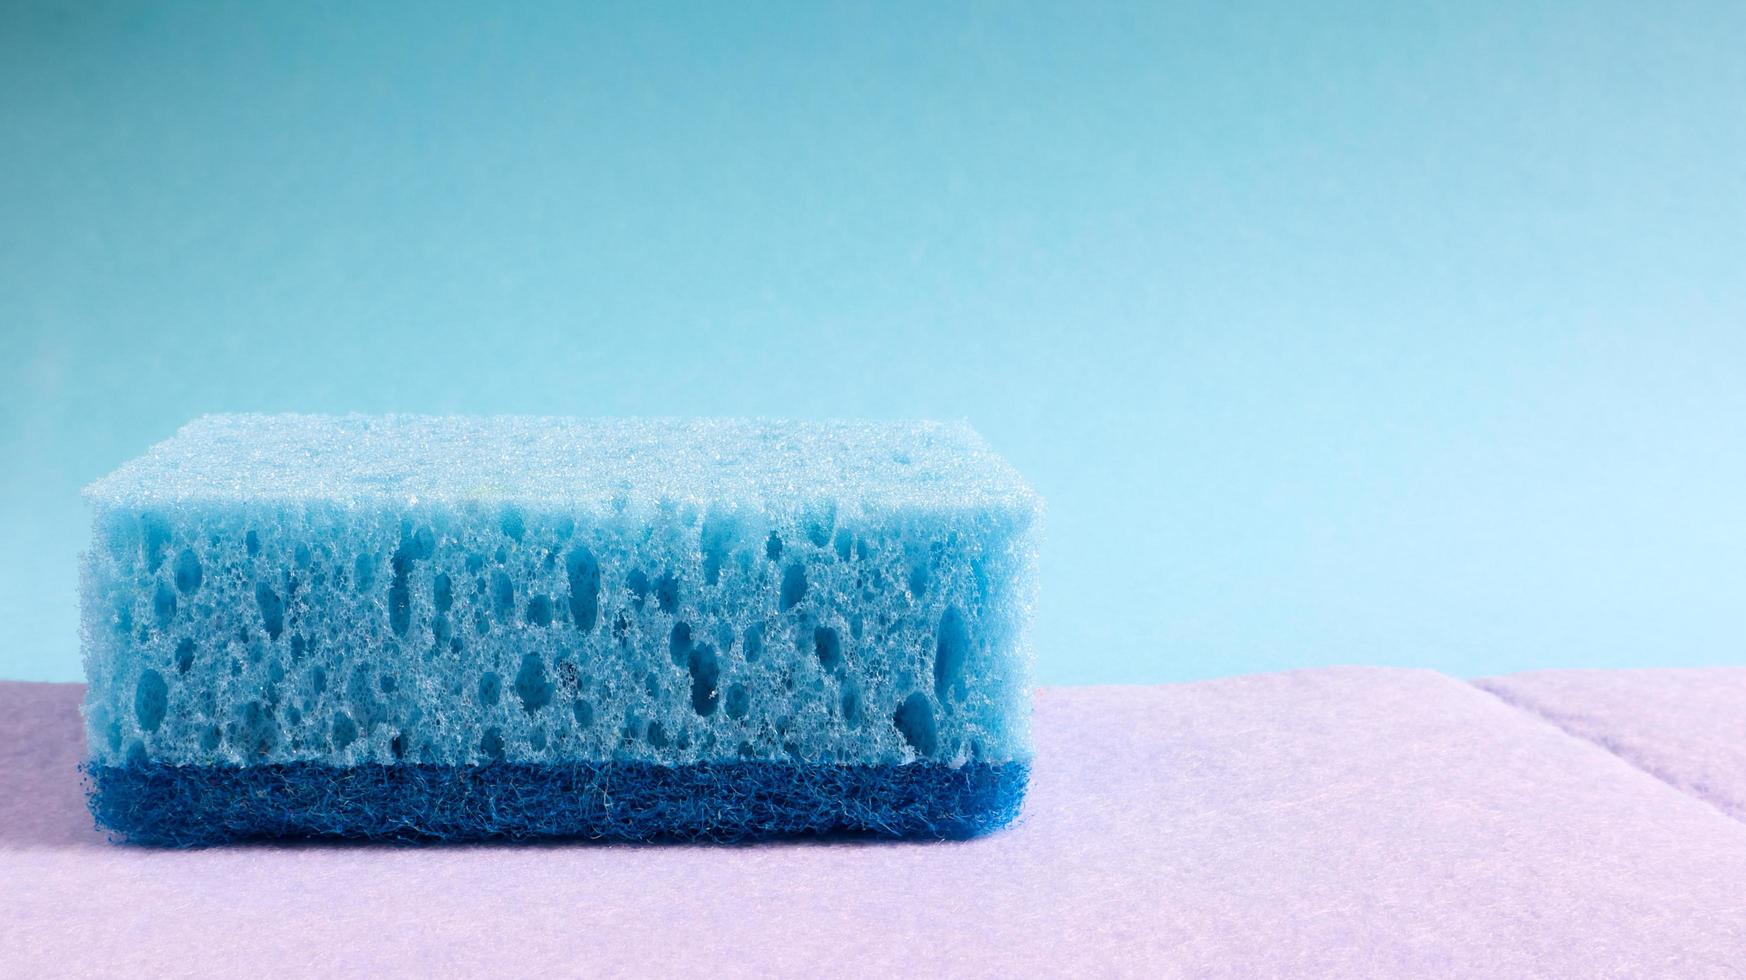 One blue sponge used to wash and erase dirt used by housewives in everyday life. They are made of porous material such as foam. Detergent retention, which allows you to spend it economically photo